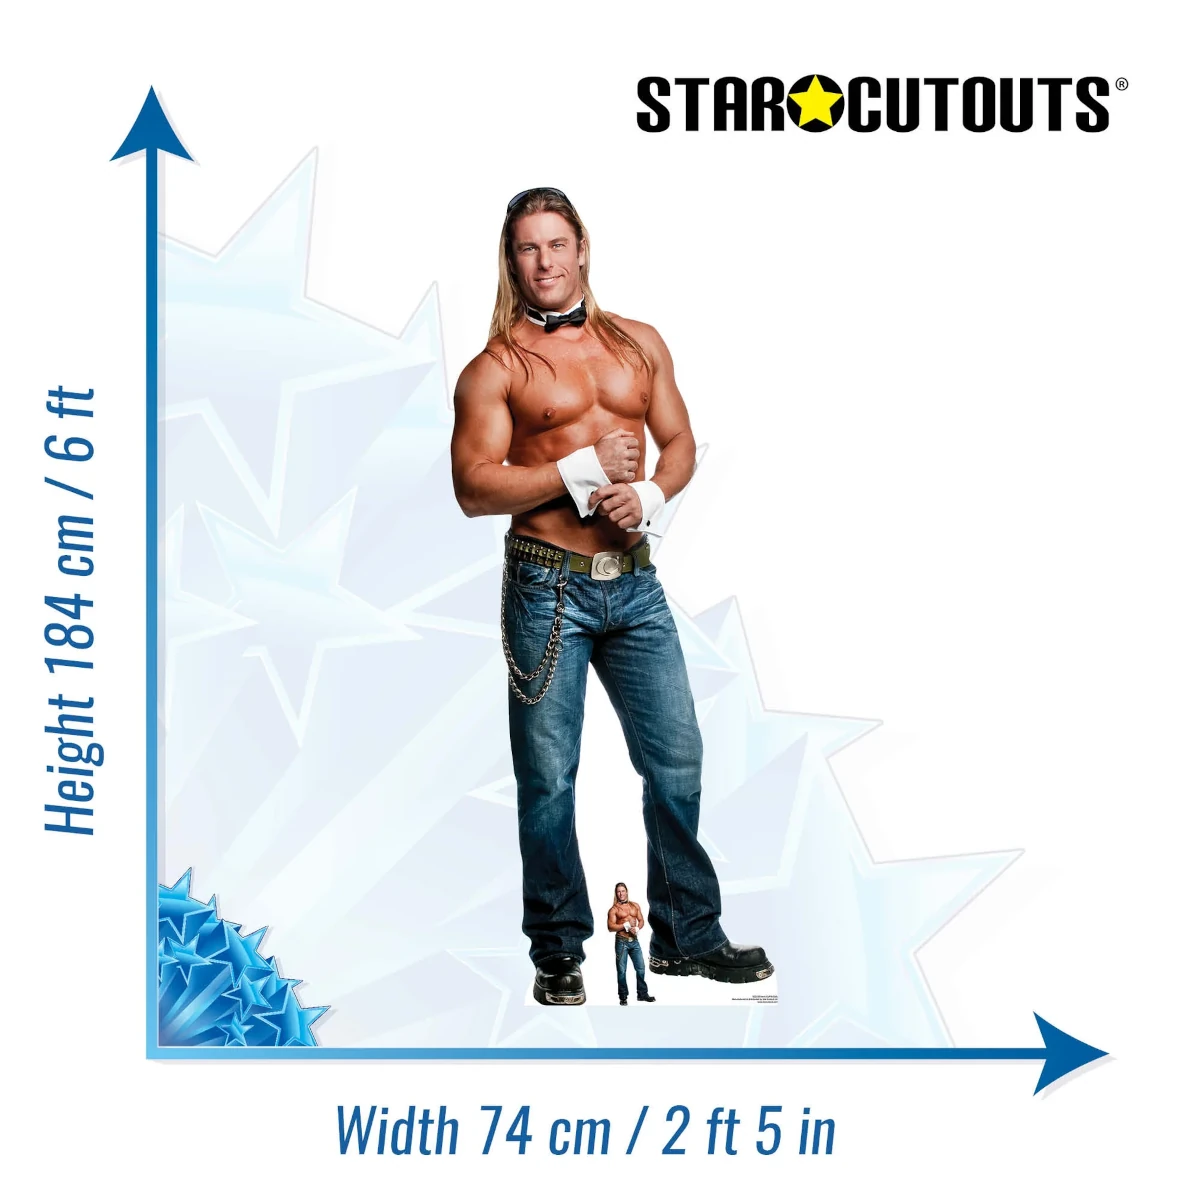 SC2158 Kevin Cornell 'Bow Tie & Shirt Cuffs' (Chippendales) Official Lifesize + Mini Cardboard Cutout Standee Size